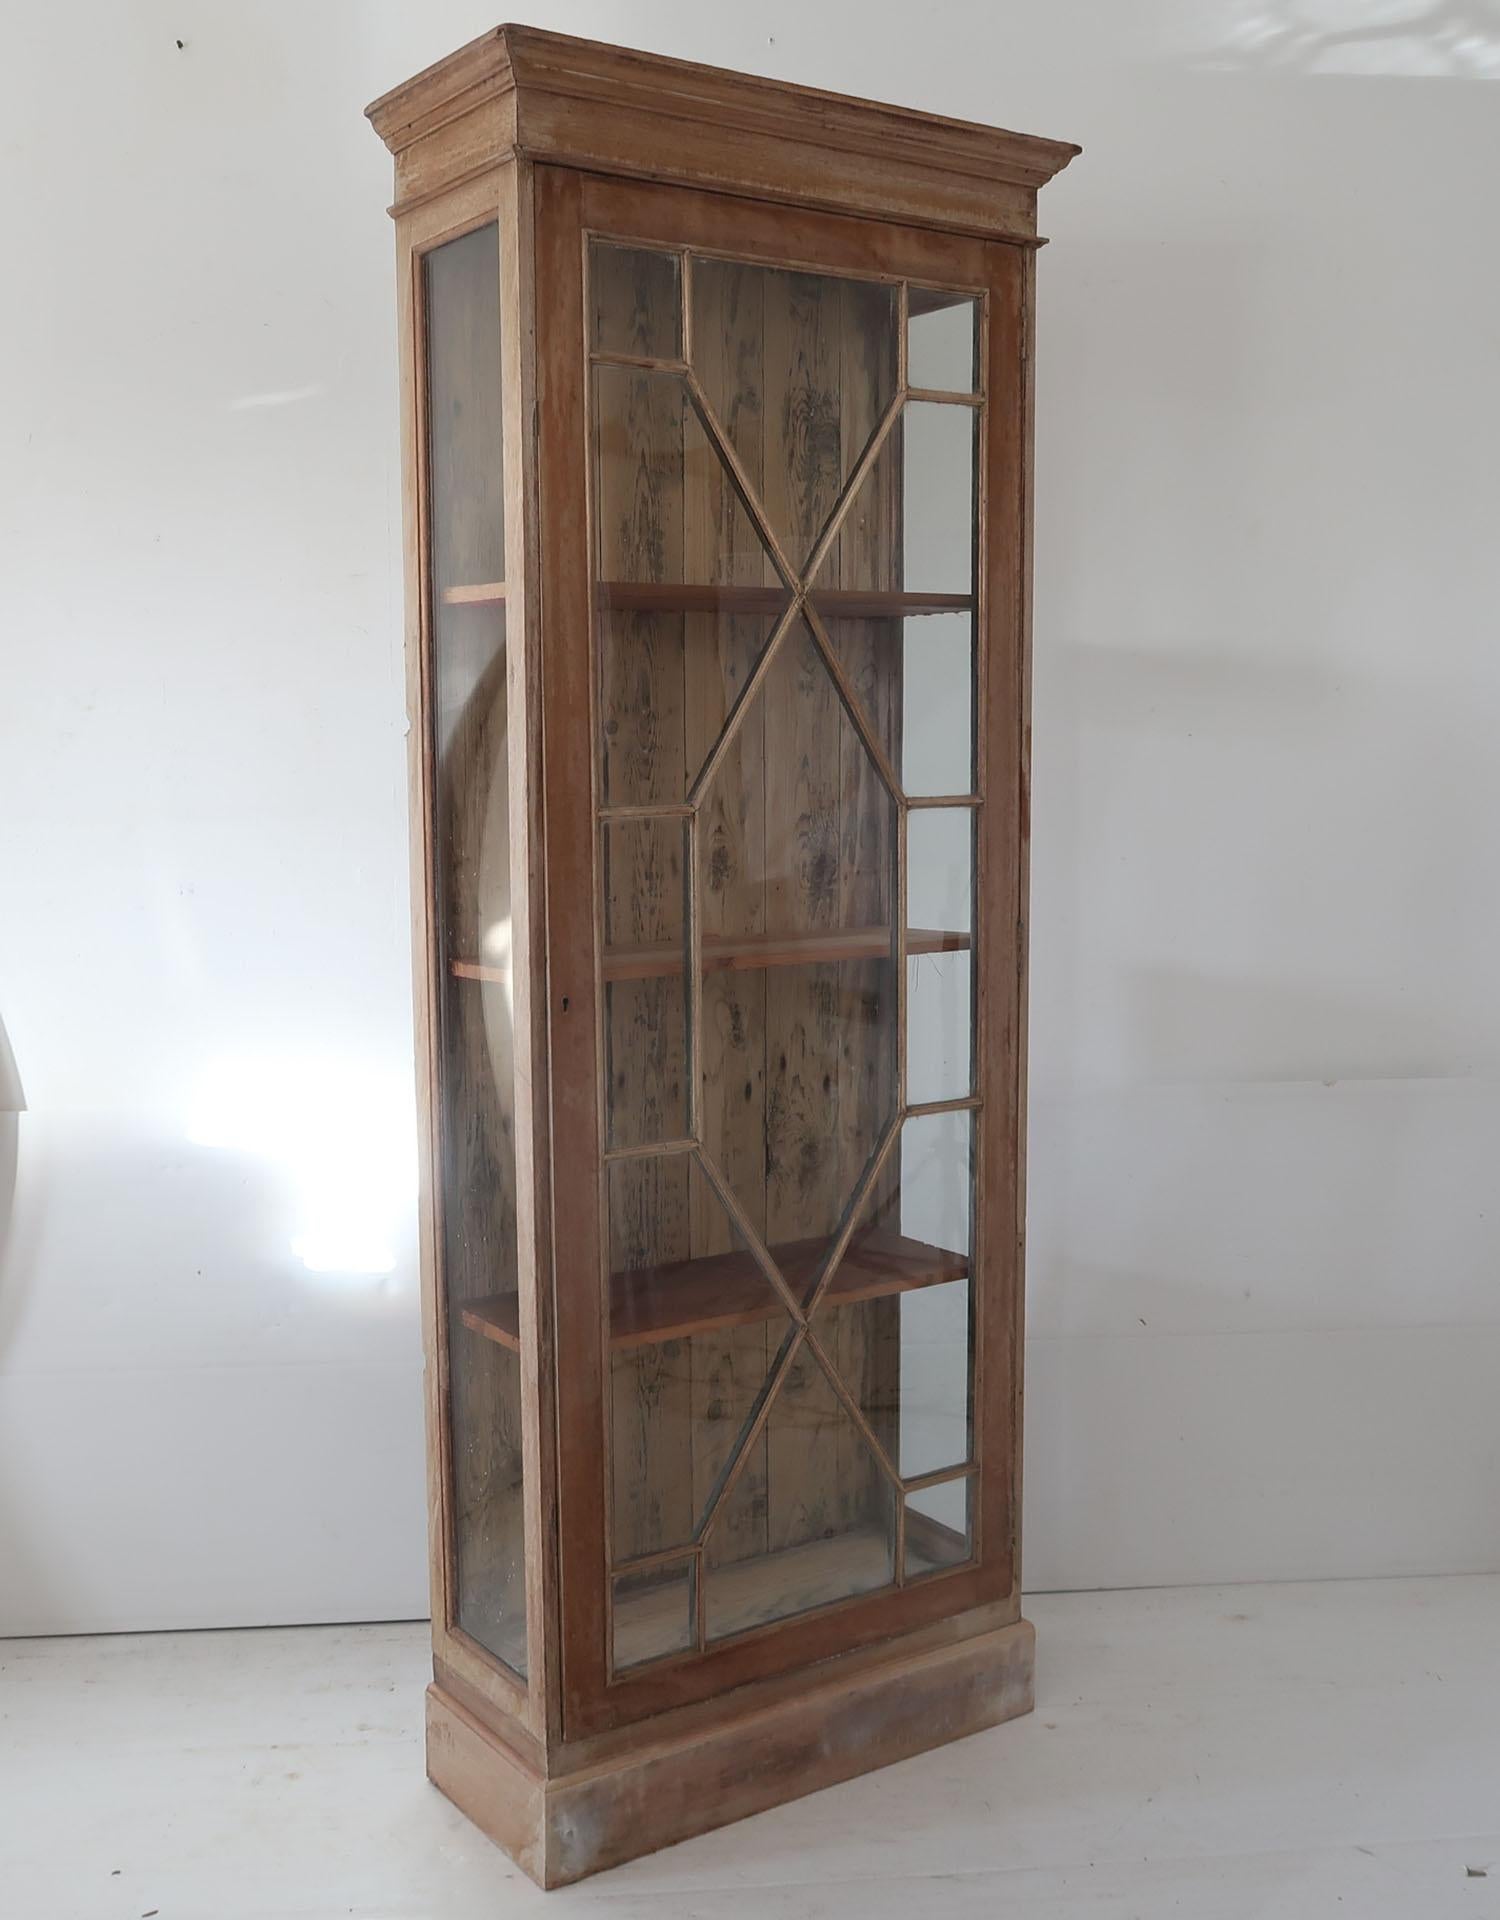 Fabulous small tropical hardwood and pine cabinet

Recently bleached

I particularly like the simplicity of this piece and the original bubbly glass in the door and sides.

The measurement given is the cornice size.

It has a key.

Free UK shipping

